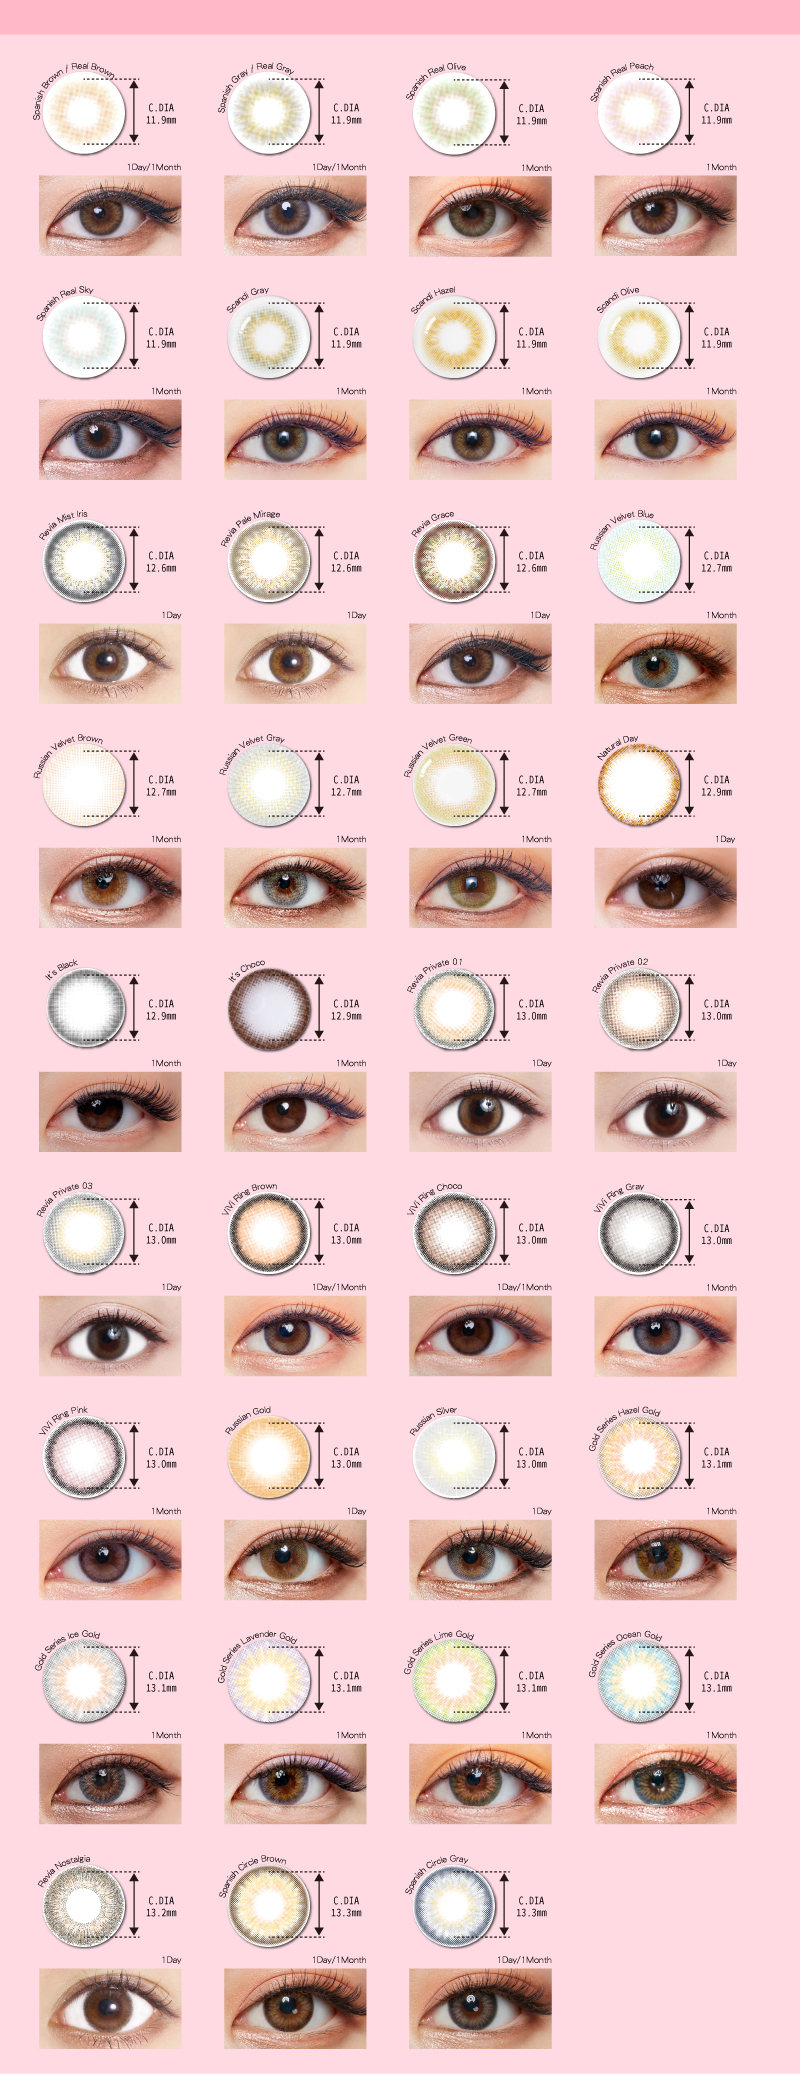 Small Diameter Colored Contact Lenses Recommendation